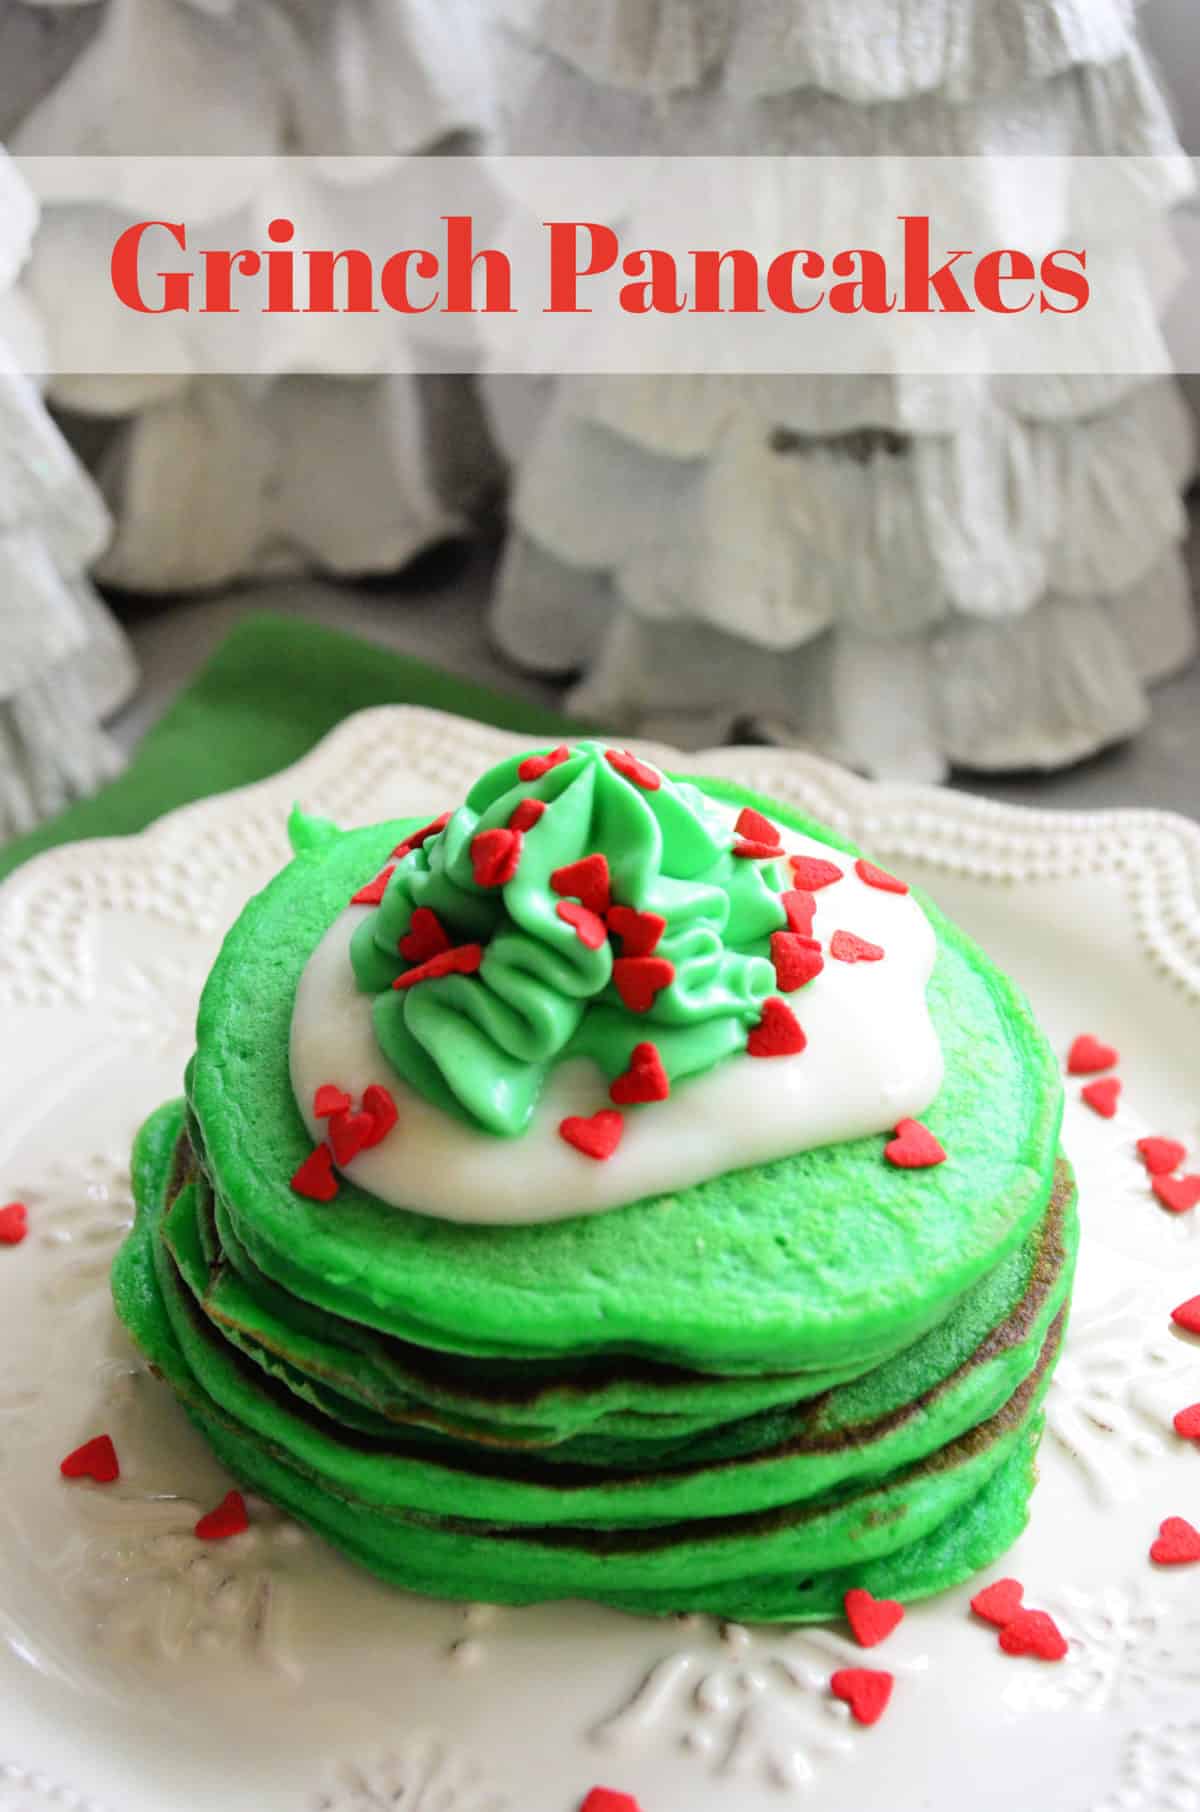 plated green pancakes topped with white frosting, green whipped cream, and red sprinkles and title text.